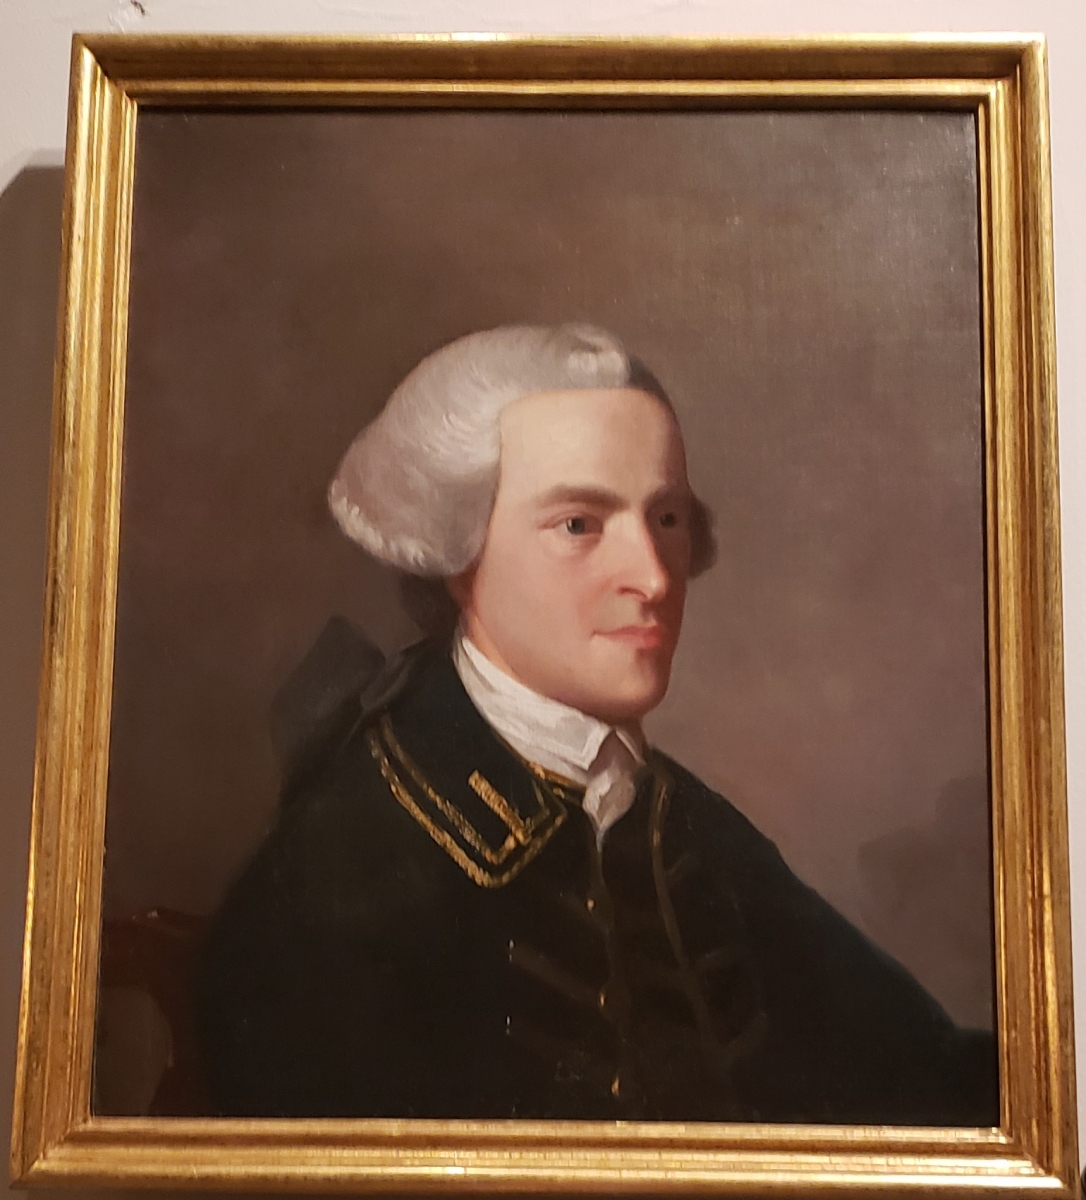 Portrait of John Hancock hanging in the Second Bank of the United States Portrait Gallery